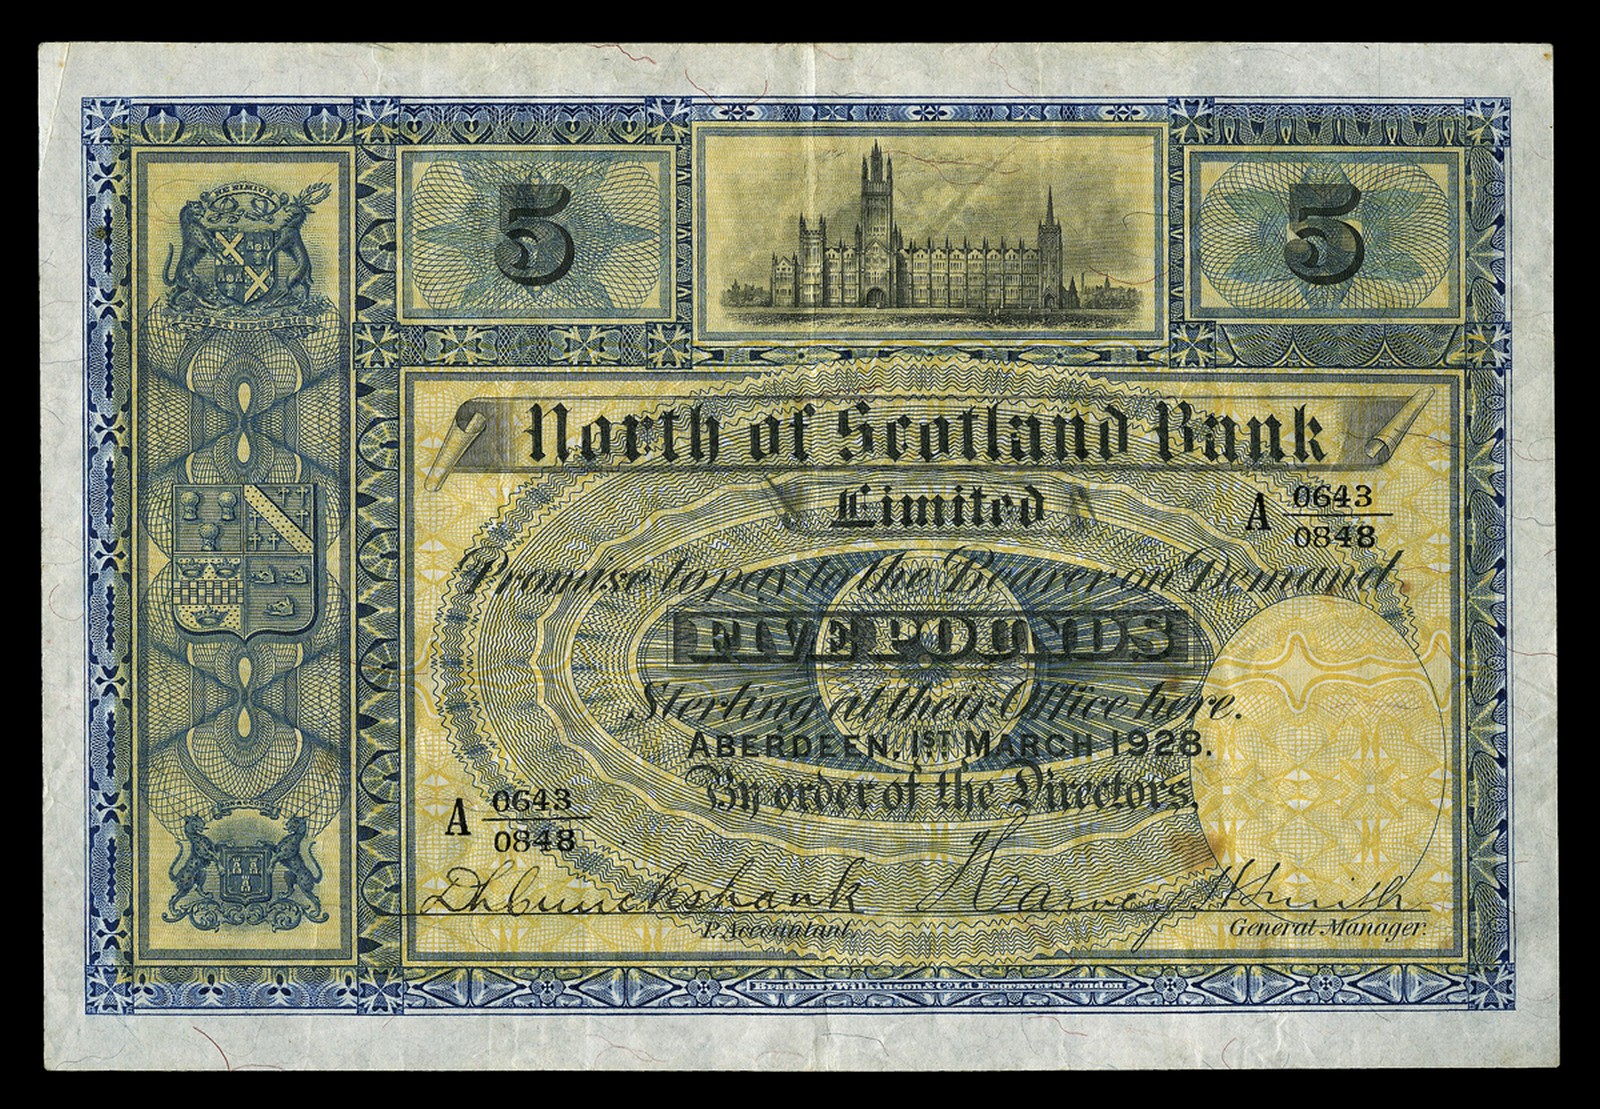 BRITISH BANKNOTES, North of Scotland Bank Ltd, Five Pounds, 1 March 1928, A 0643/0848, Smith-